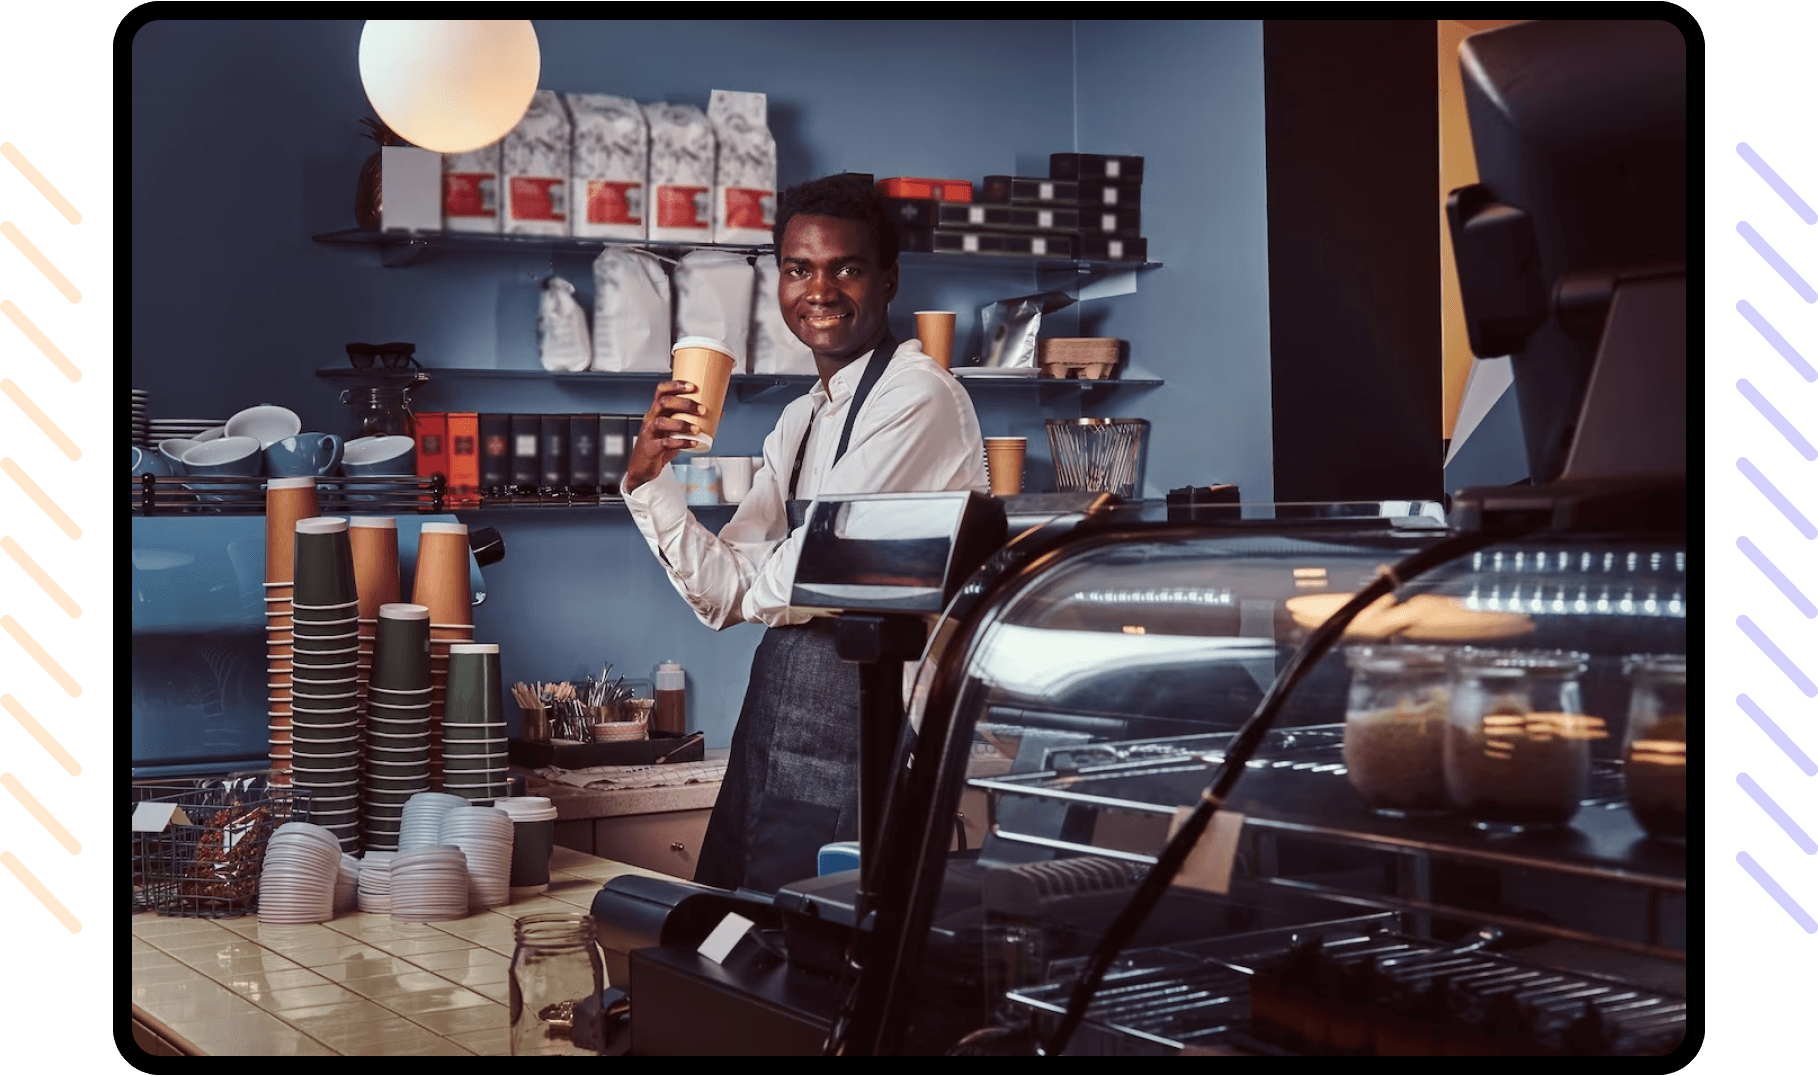 barista working at coffee shop